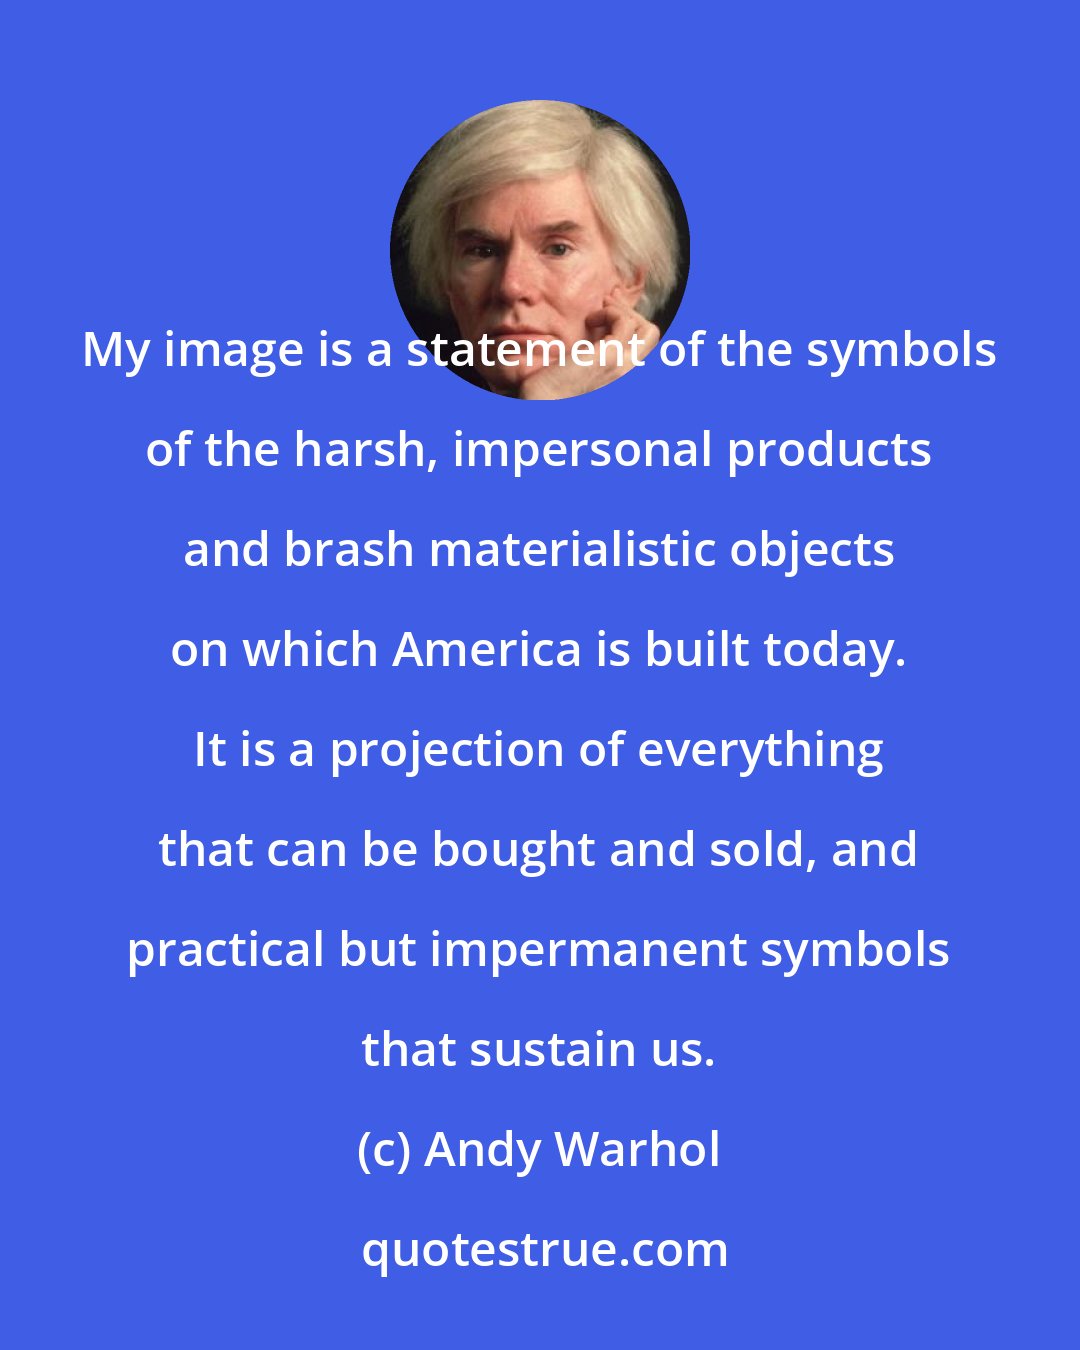 Andy Warhol: My image is a statement of the symbols of the harsh, impersonal products and brash materialistic objects on which America is built today. It is a projection of everything that can be bought and sold, and practical but impermanent symbols that sustain us.